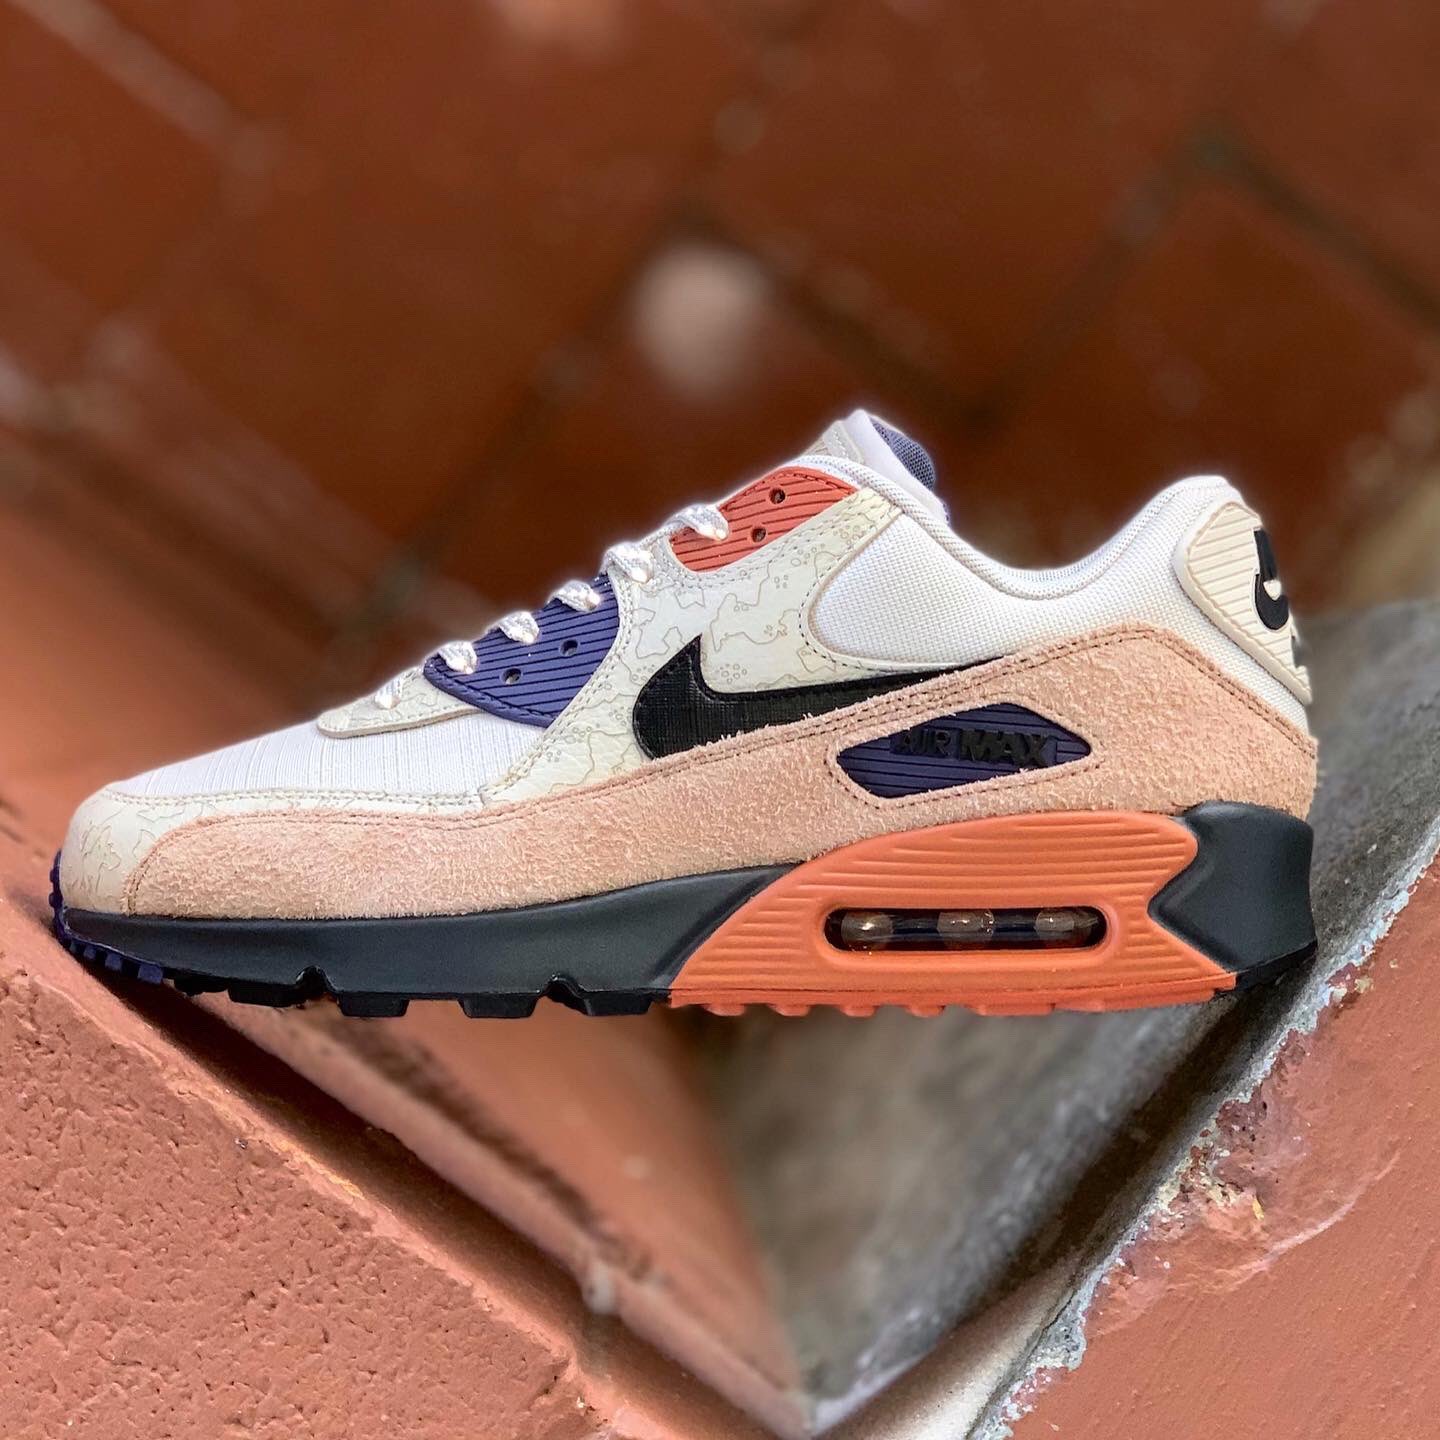 MODA3 on Twitter: "#comingsoon // @Nike // Air Max 90 NRG Camowabb // US Men's Sizes 4-14 // $140 // Available first come, first serve this Friday 11AM. . . . #